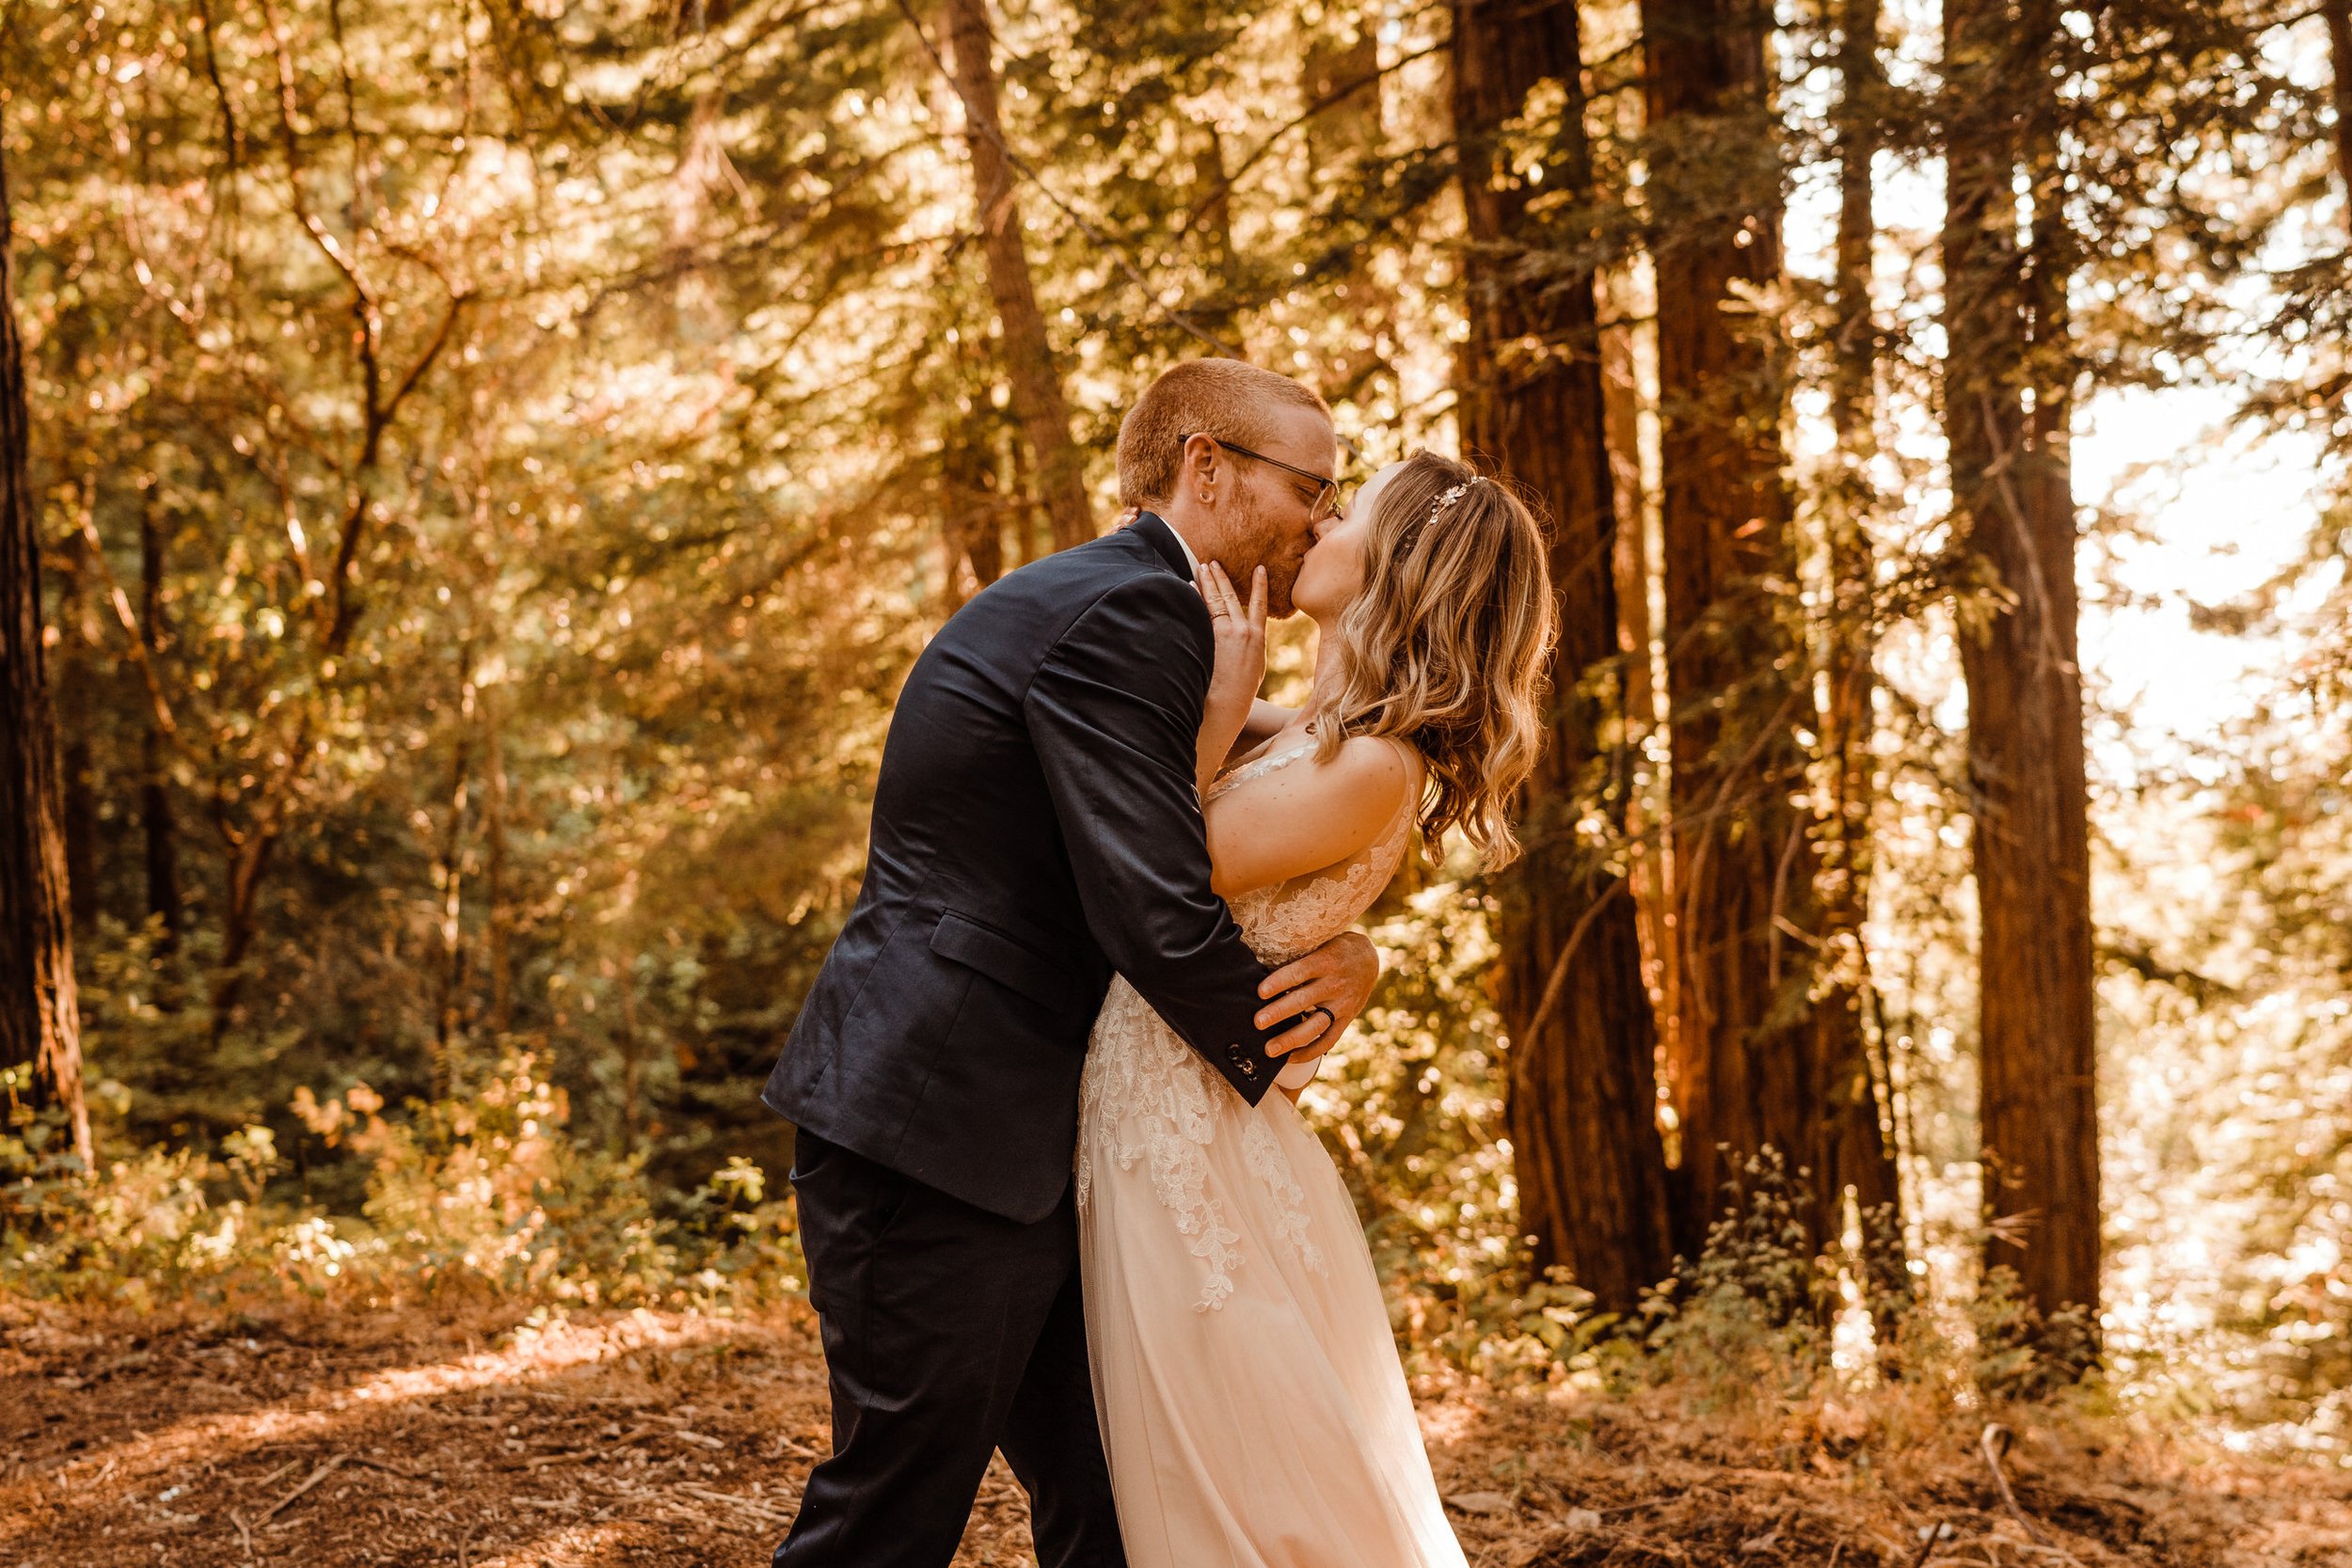 Wedding-in-the-Woods-Bride-and-Groom-Sunlit-Pictures-Beneath-Redwood-Forest (29).jpg